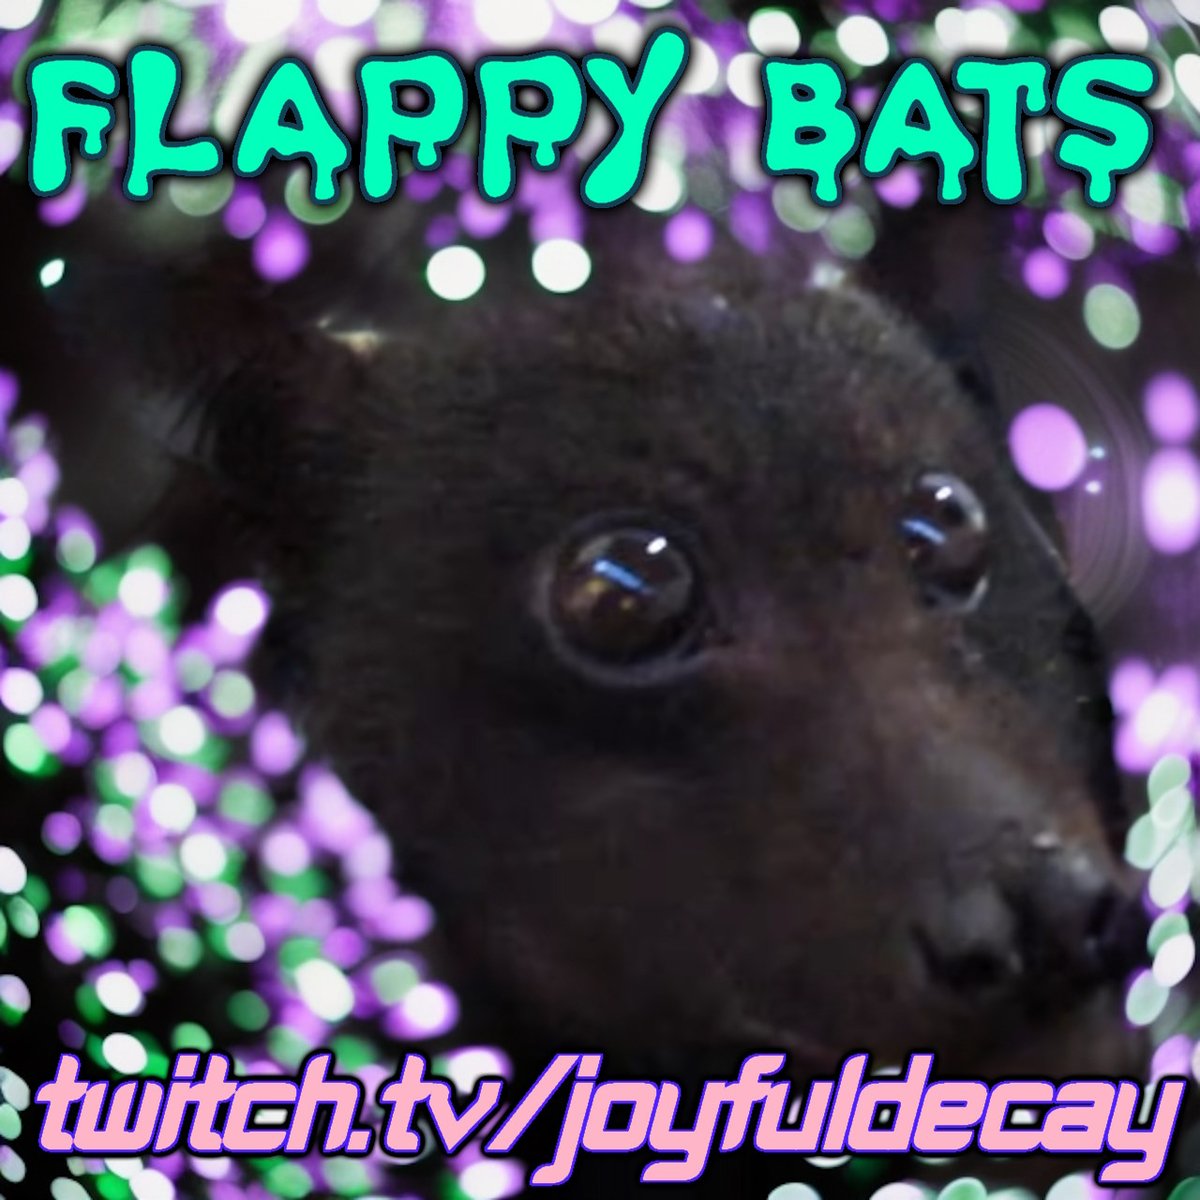 Live now playing #goth and #darkwave twitch.tv/joyfuldecay